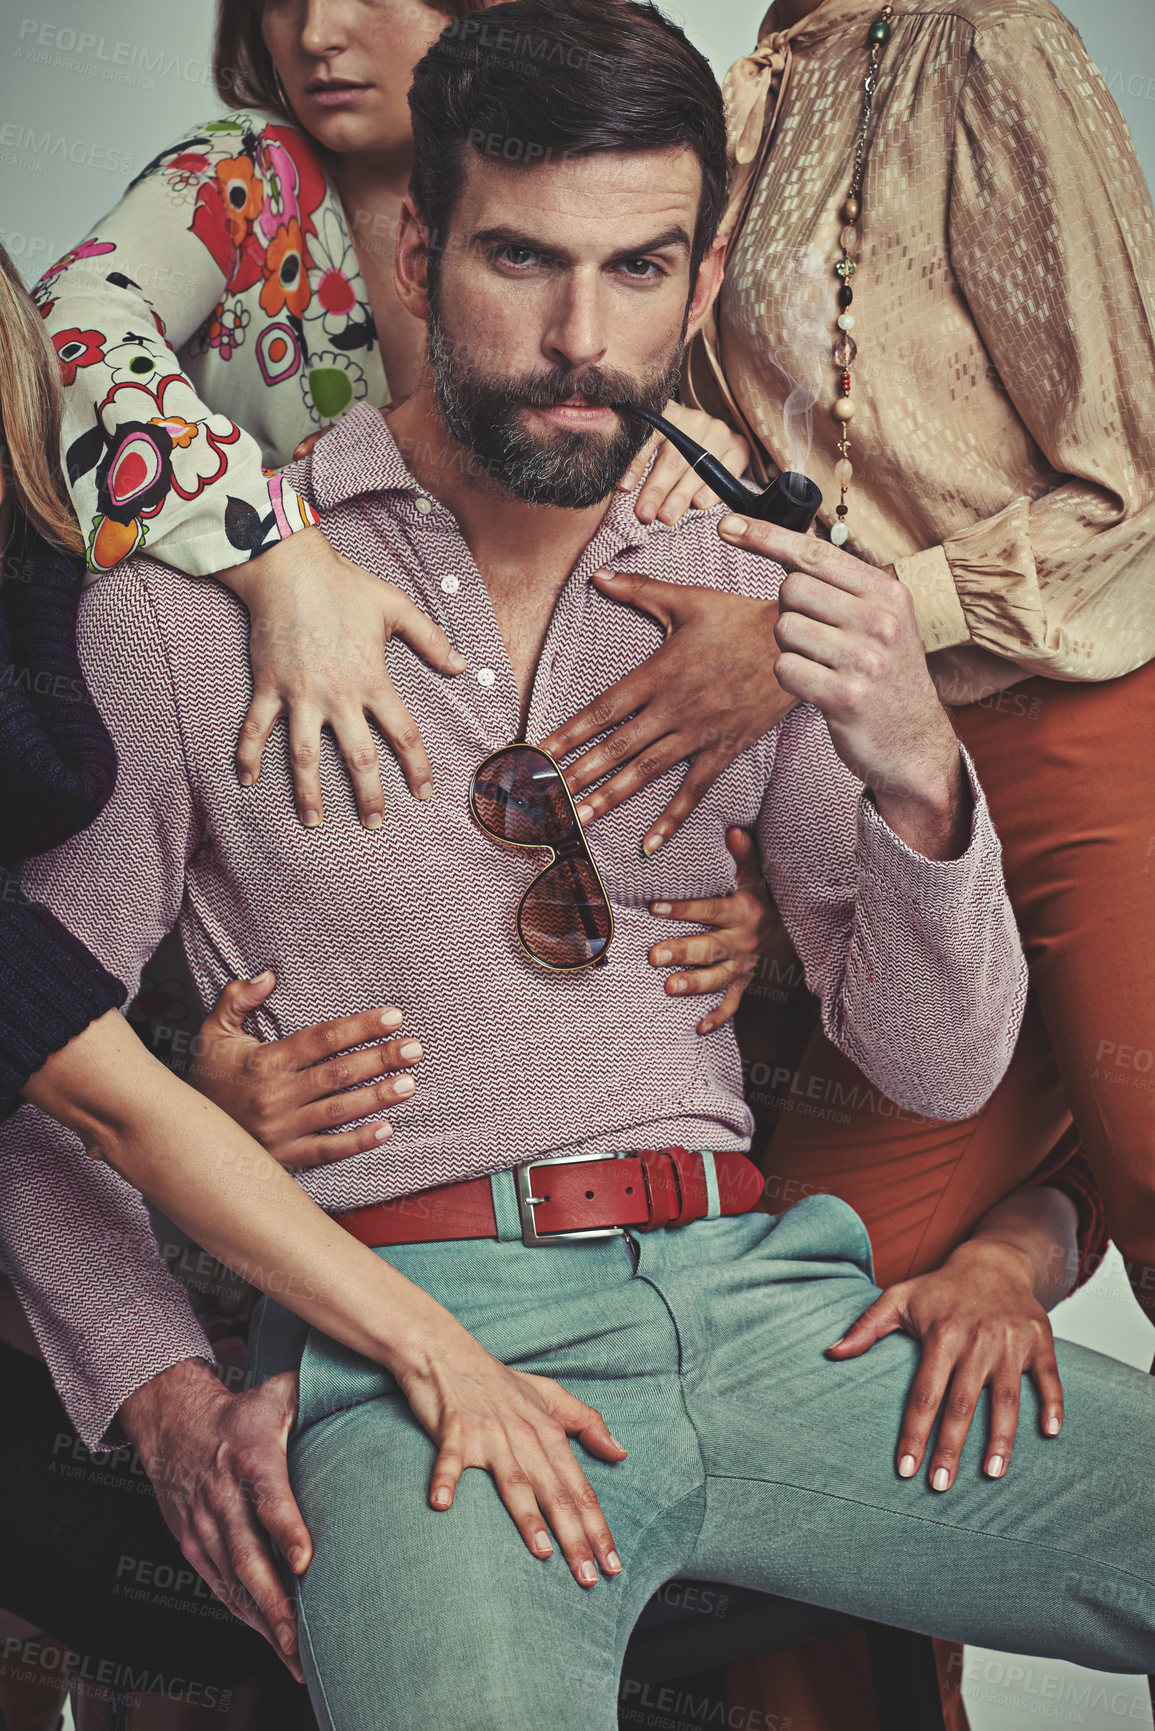 Buy stock photo Studio shot of an attractive man in retro 70s wear being touched by women while smoking his pipe